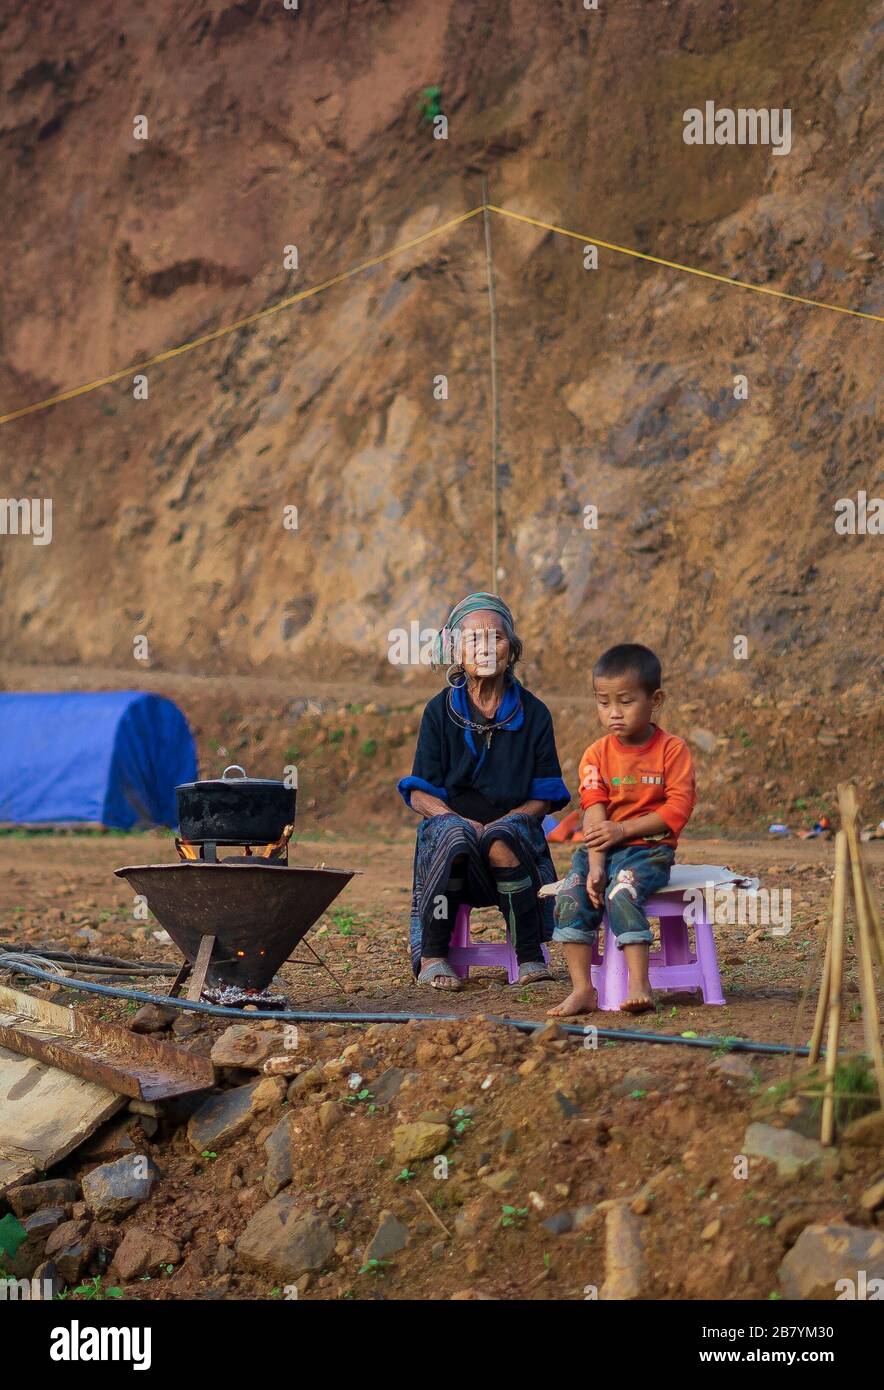 Sa pa, Vietnam-Sep 22, 2017. An old Hmong lady sat with her grandson in front of the fire on Sep 22, 2017 in Sa pa, North Vietnam Stock Photo